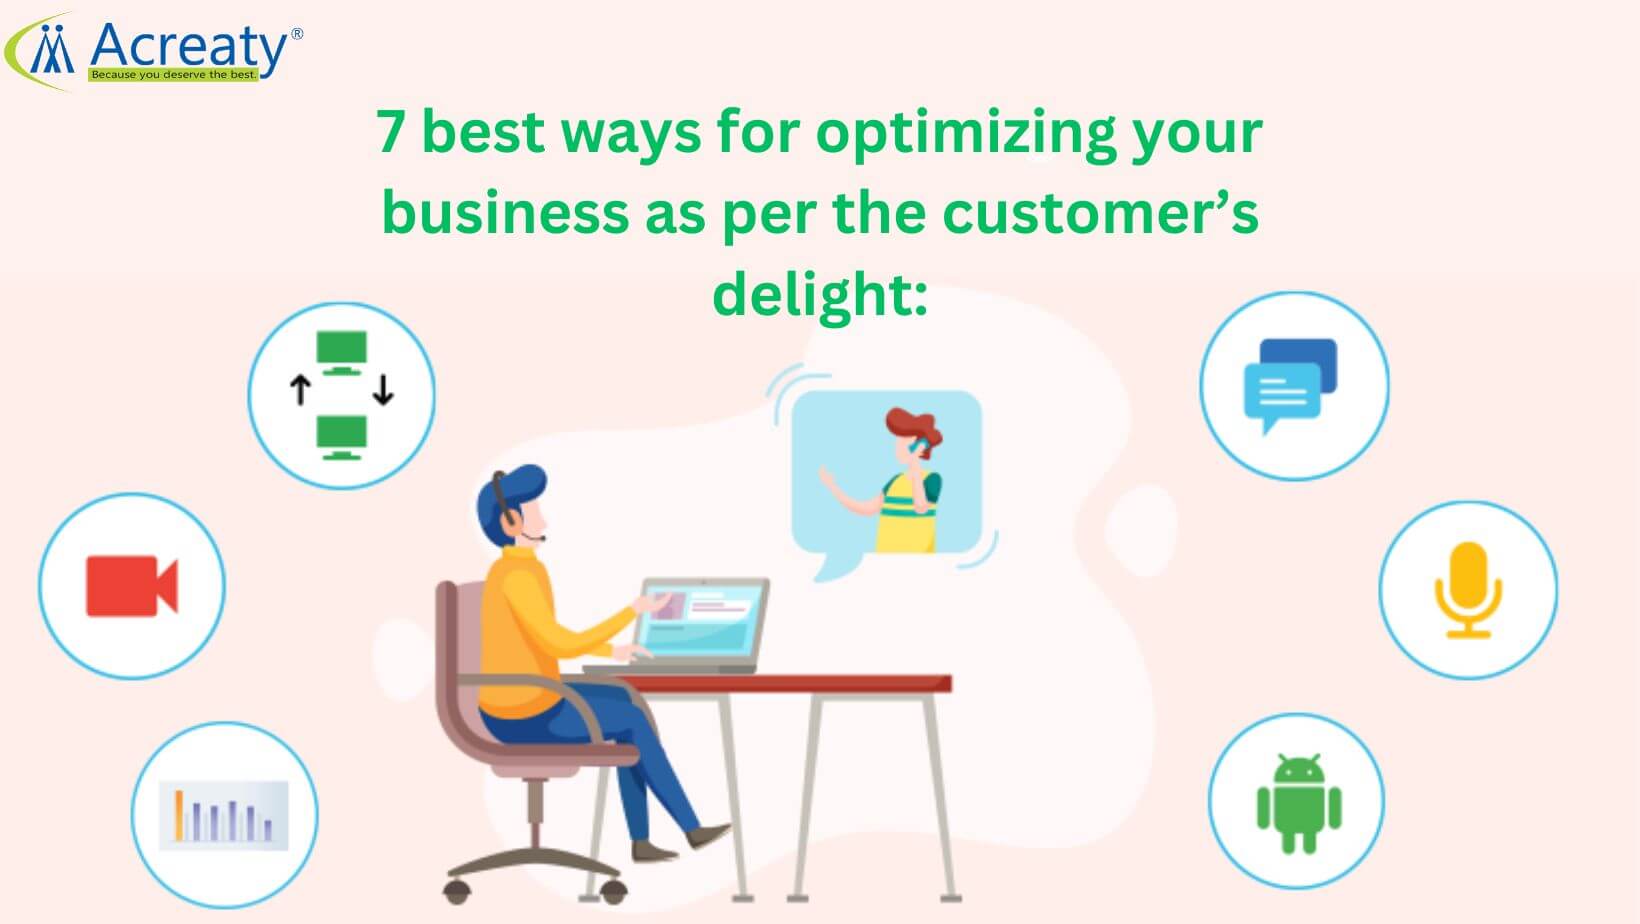 7 Ways to optimize your business for customer delight